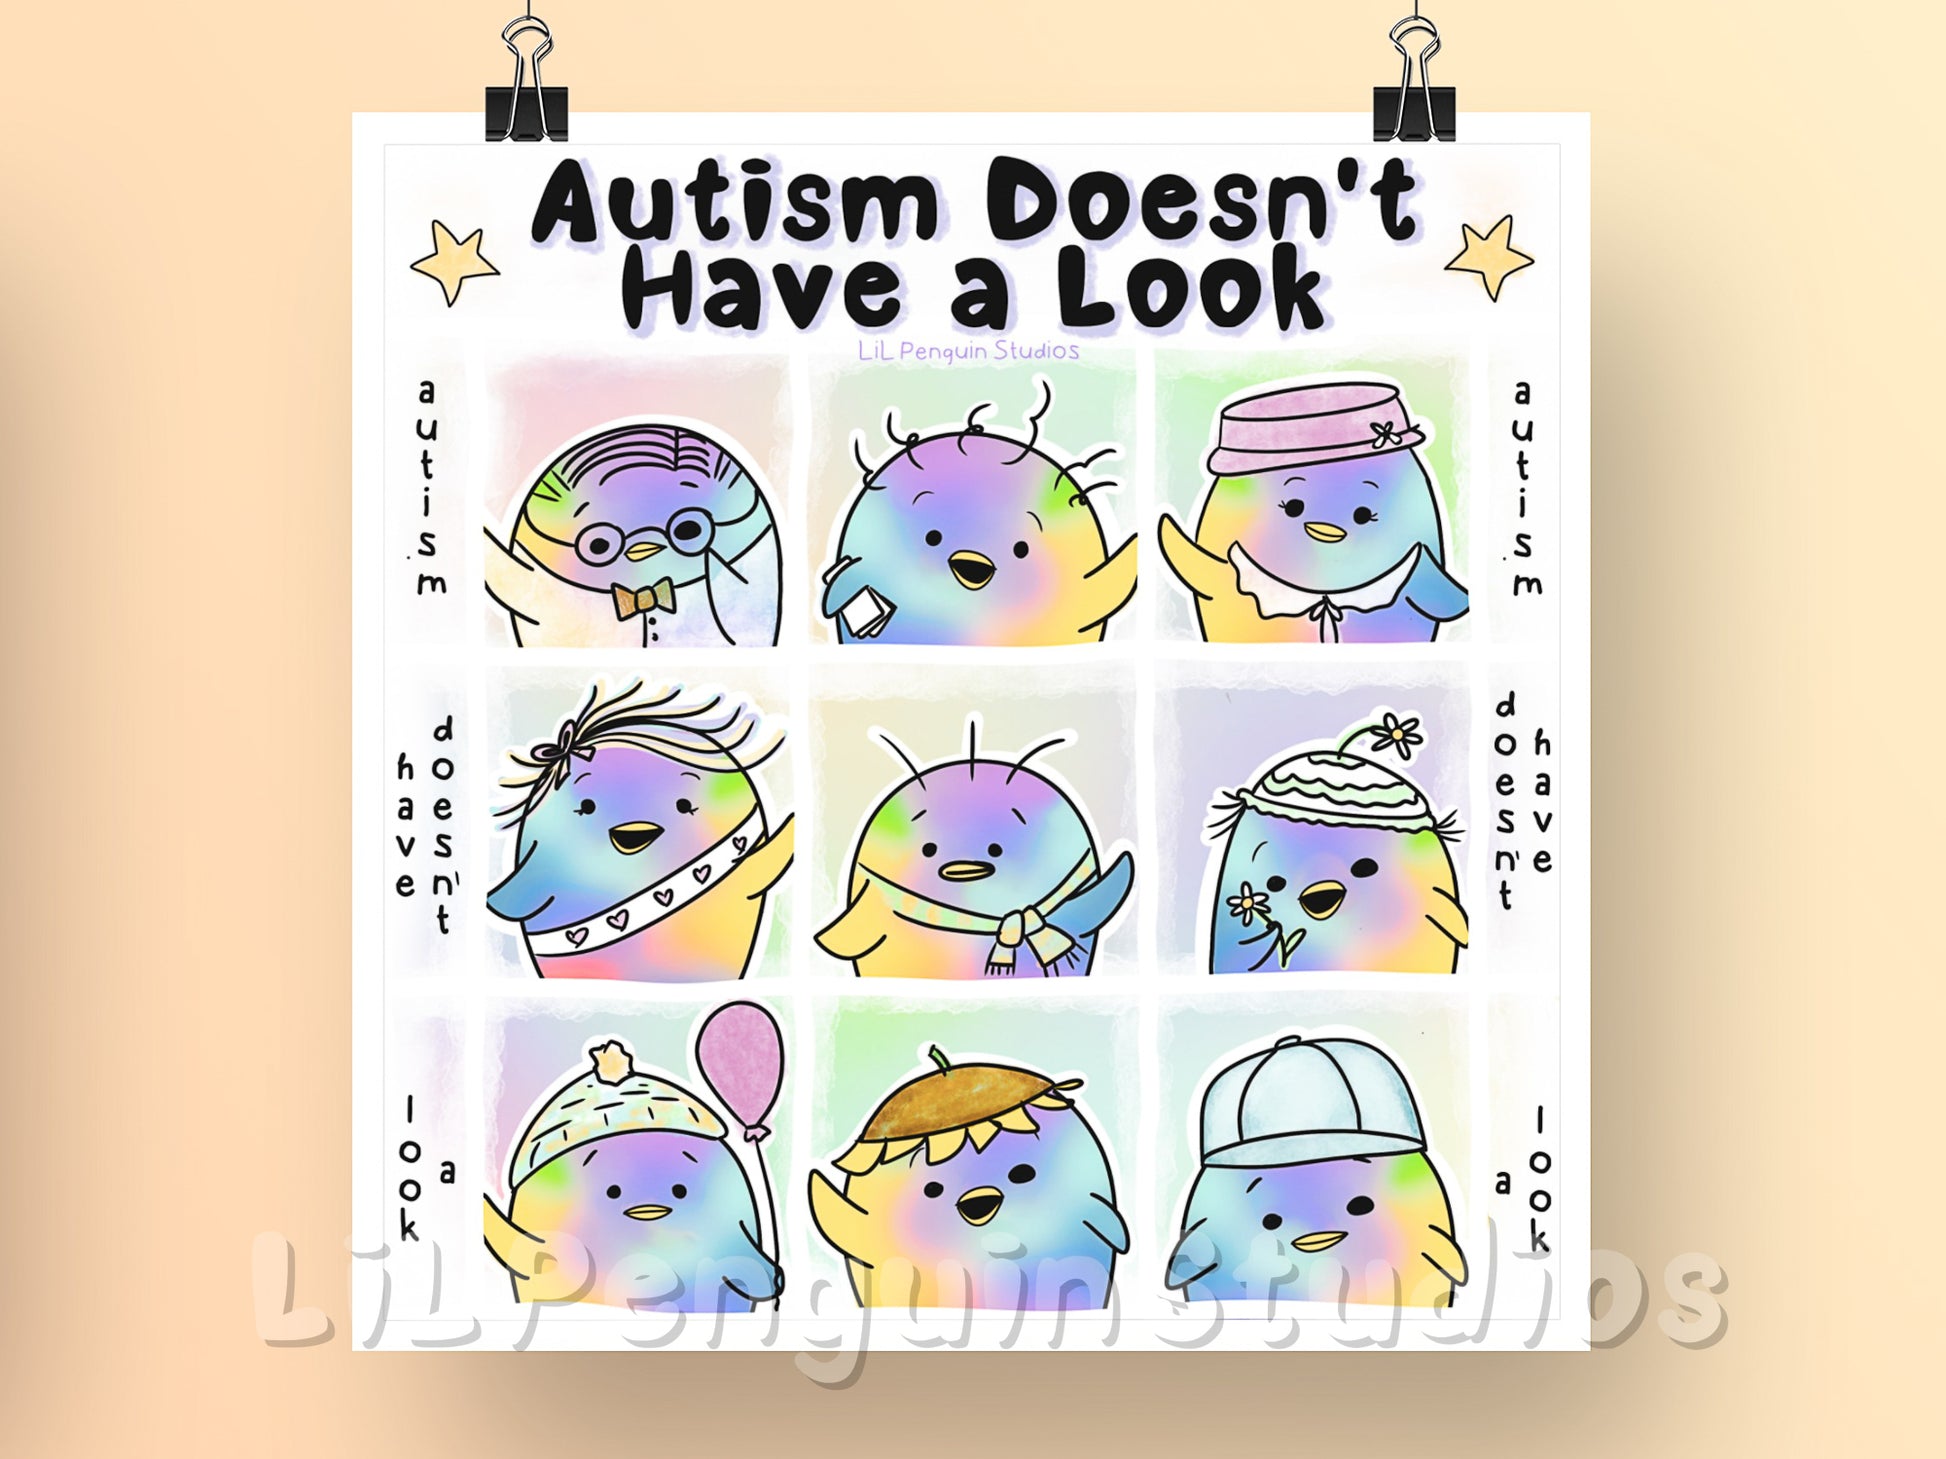 Autism Doesn't Have a Look digital art print poster included in the Autistic Affirmations and Reminders' Printable Poster Set.